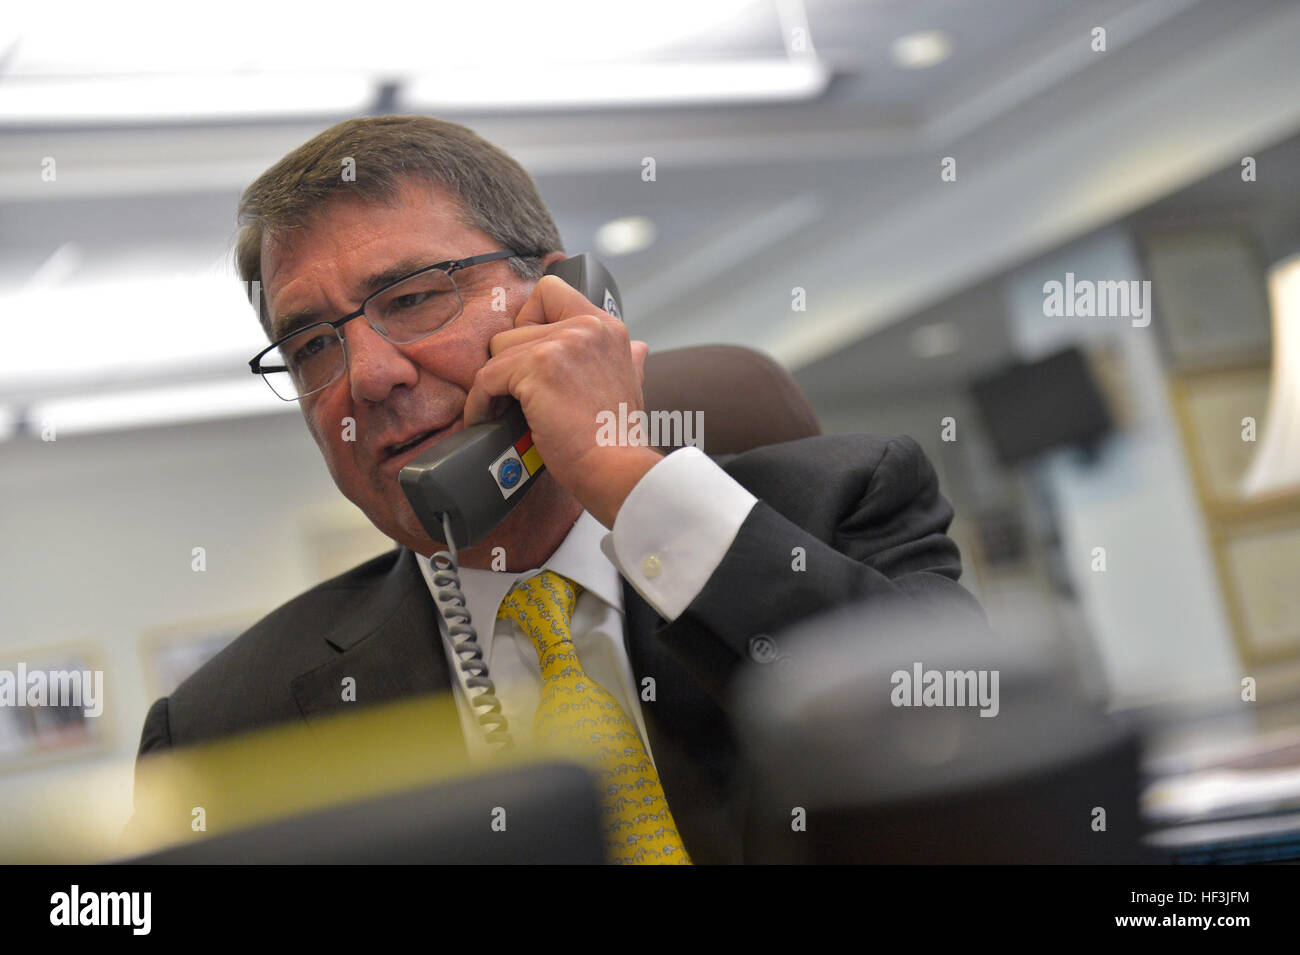 Secretary of Defense Ash Carter speaks by phone with Army 1st Lt. Shaye Haver and 1st Lt. Kristen Griest to congratulate the two for their recent graduation from the rigorous Army Ranger School from his office at the Pentagon, Aug. 20, 2015. Haver and Griest are the first women to successfully complete the course after the Army began allowing women to participate in the elite program. (DOD Photo by Glenn Fawcett/Released) Secretary of defense congratulates first women to graduate from US Army Ranger School 150820-D-NI589-050 Stock Photo